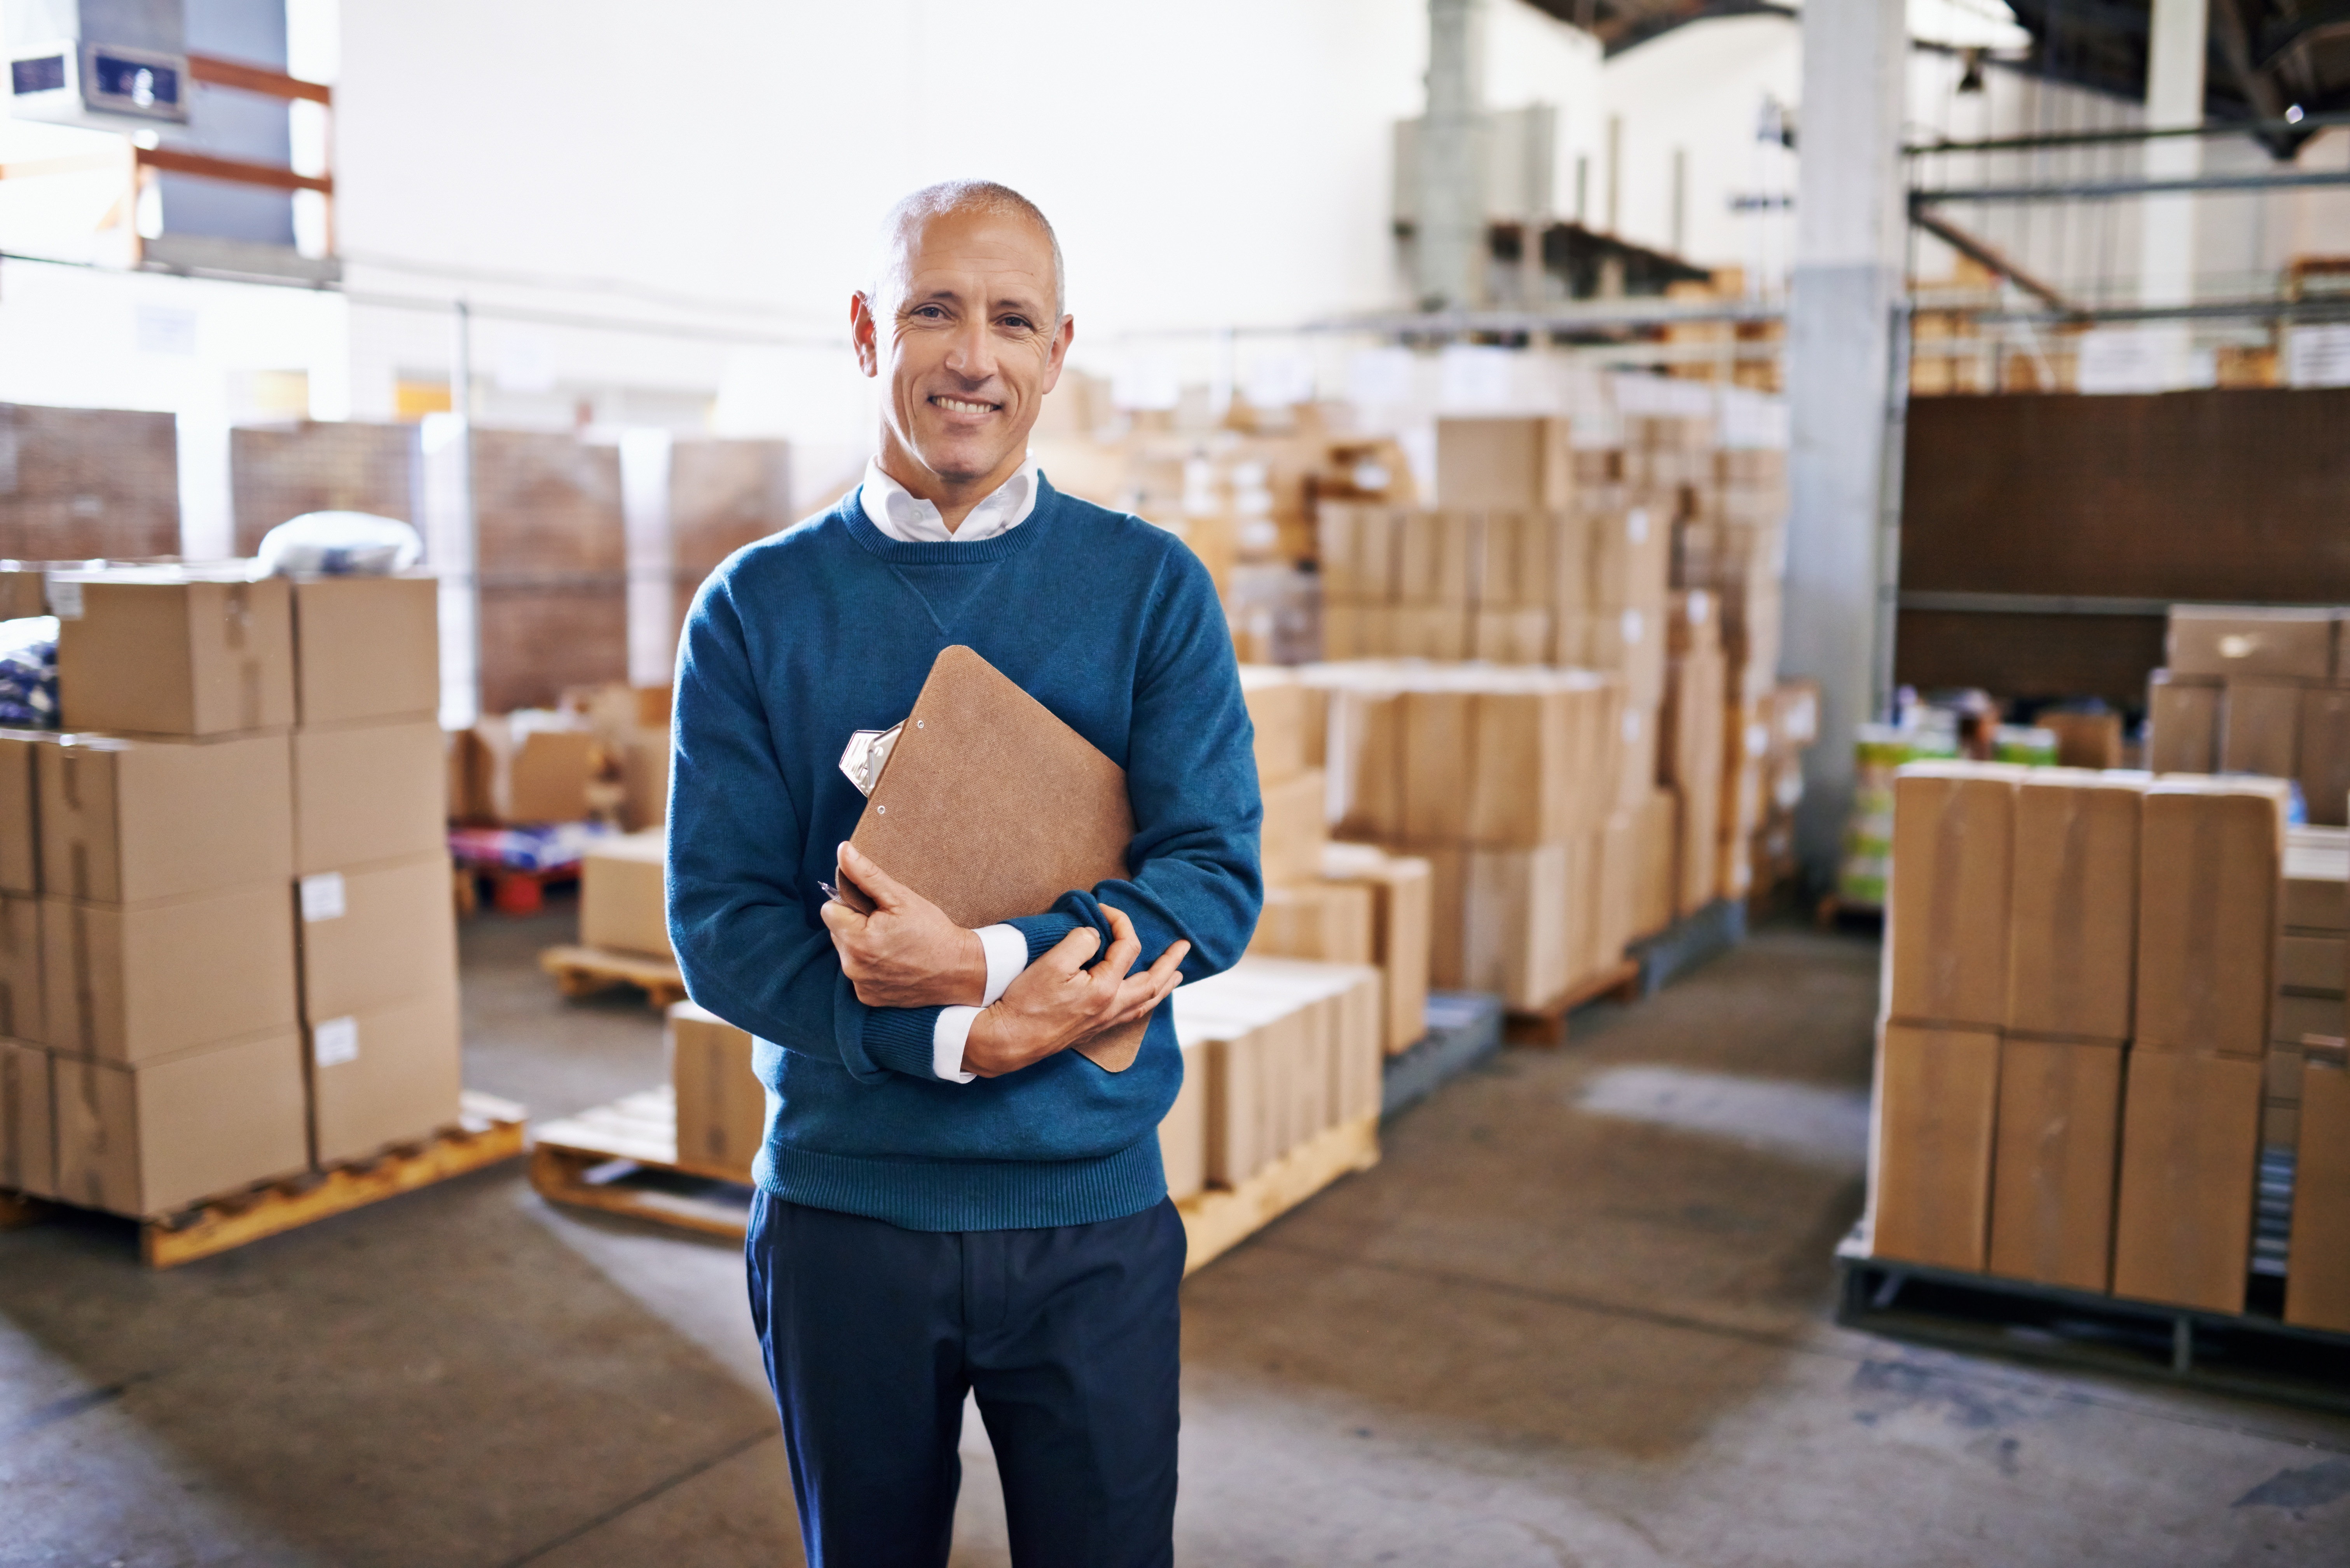 Smiling man standing in warehouse. He's happy because he used WooCommerce SEO will increase leads and his business is growing.